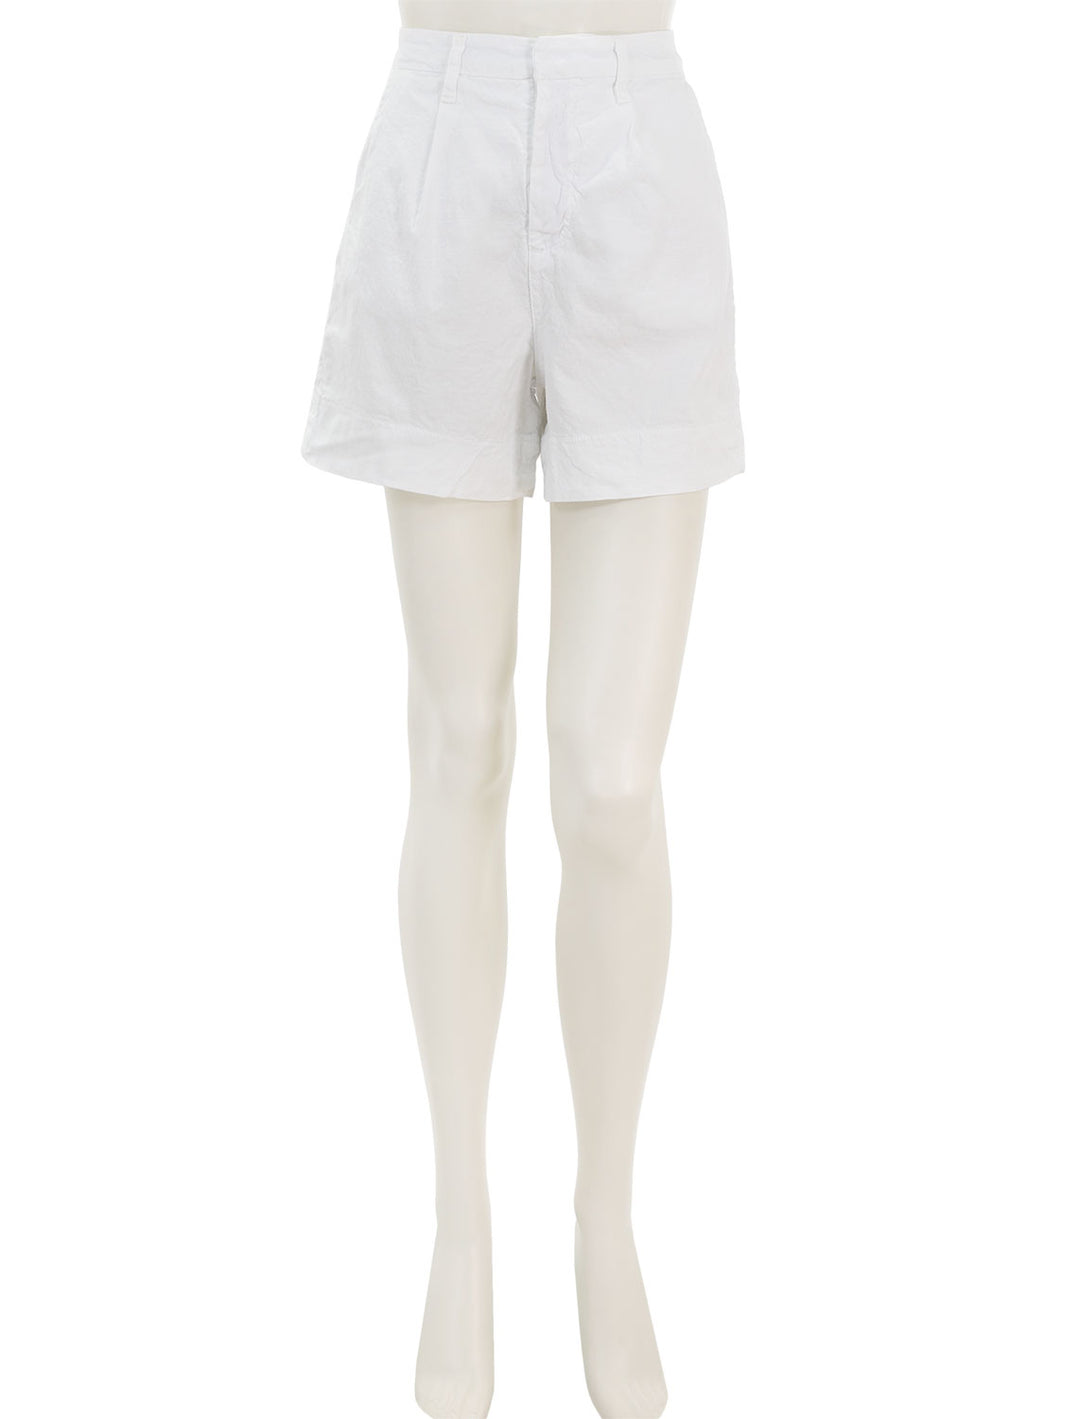 Front view of Frank & Eileen's walking short in white.